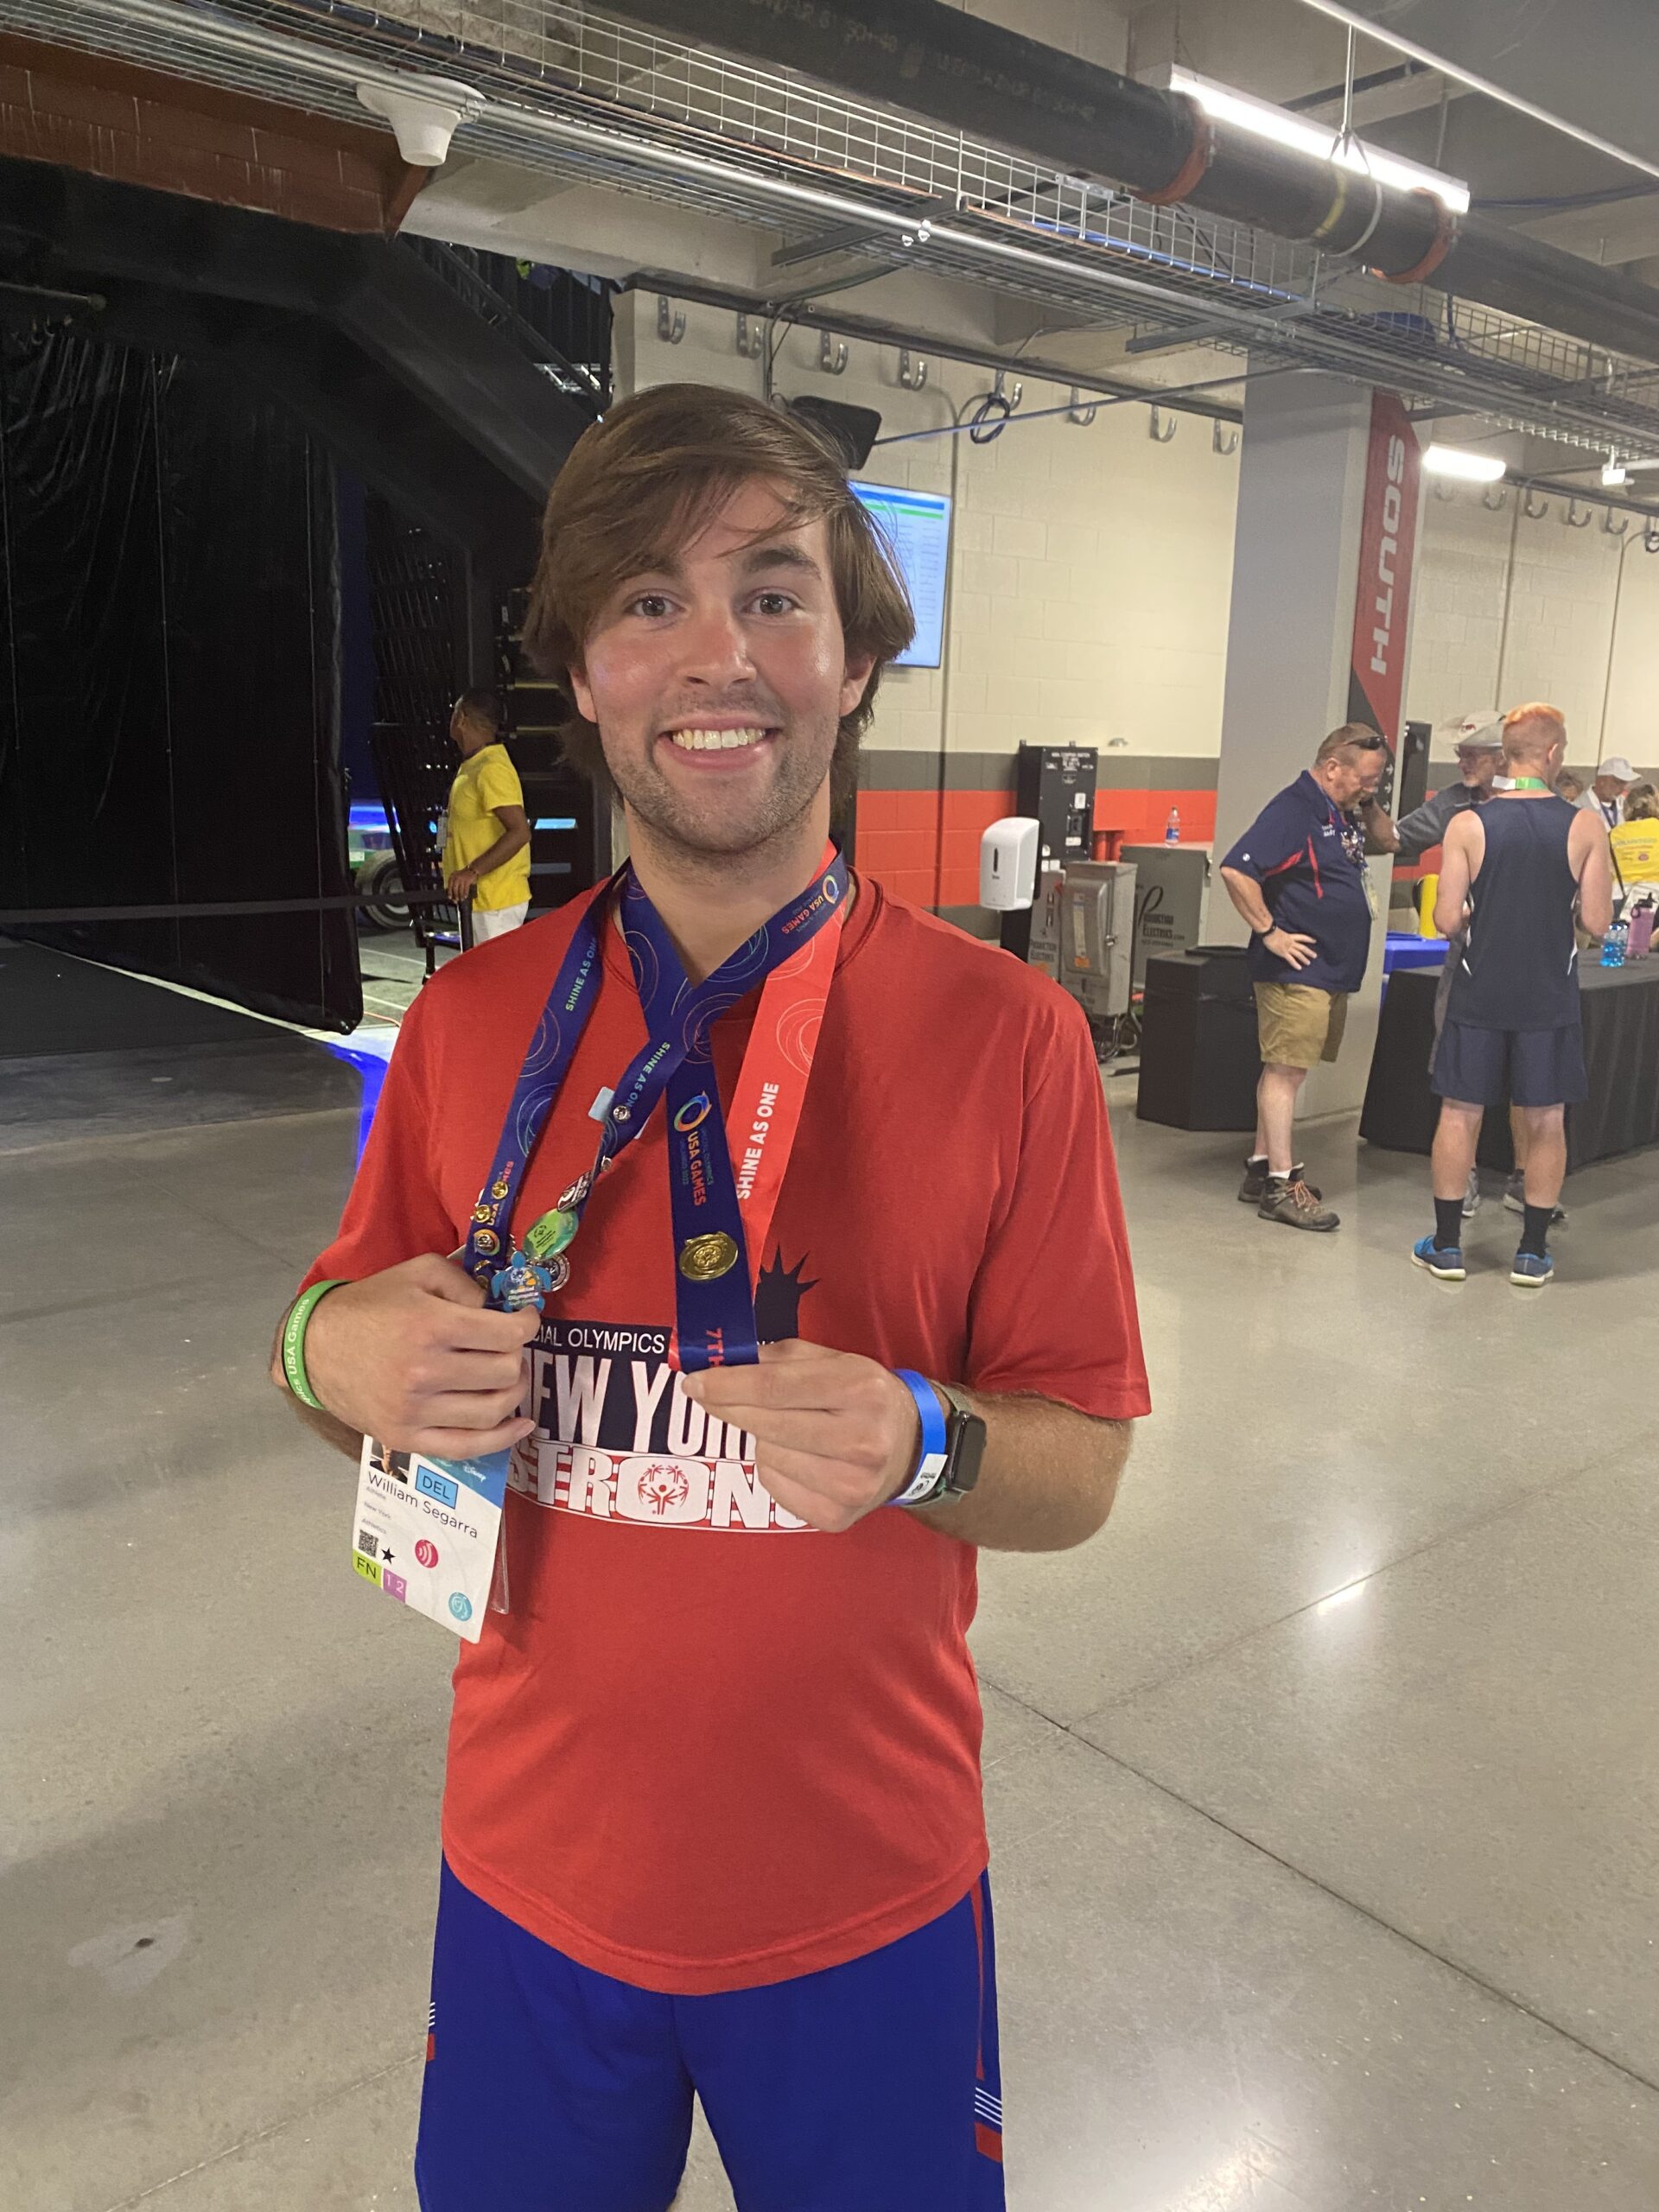 Southampton's William Segarra finished in the top 10 in three events at the Special Olympics USA Games in Orlando, Florida, earlier this month.